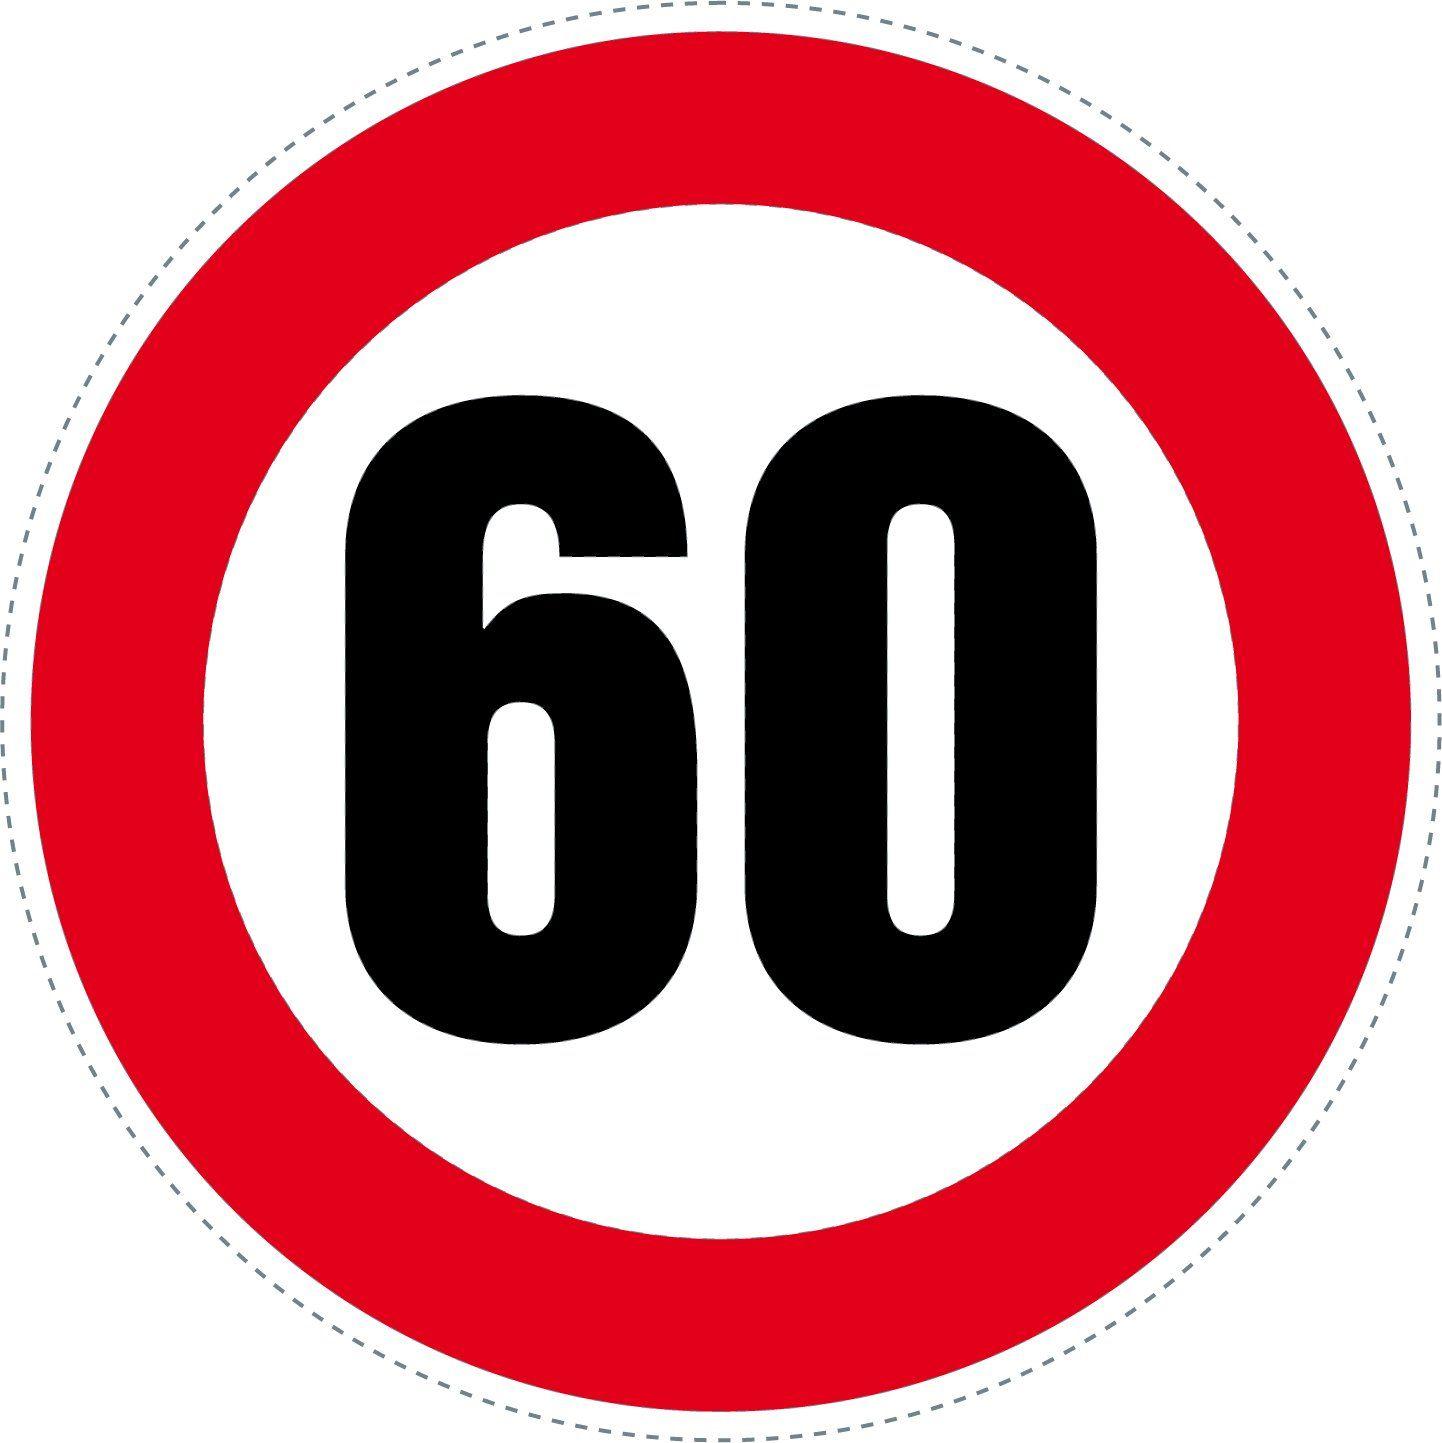 Red Circle Company Logo - SAFIRMES 2 Red Speed Limit Circle Stickers, 60 - (125 mm/inch = 5 ...